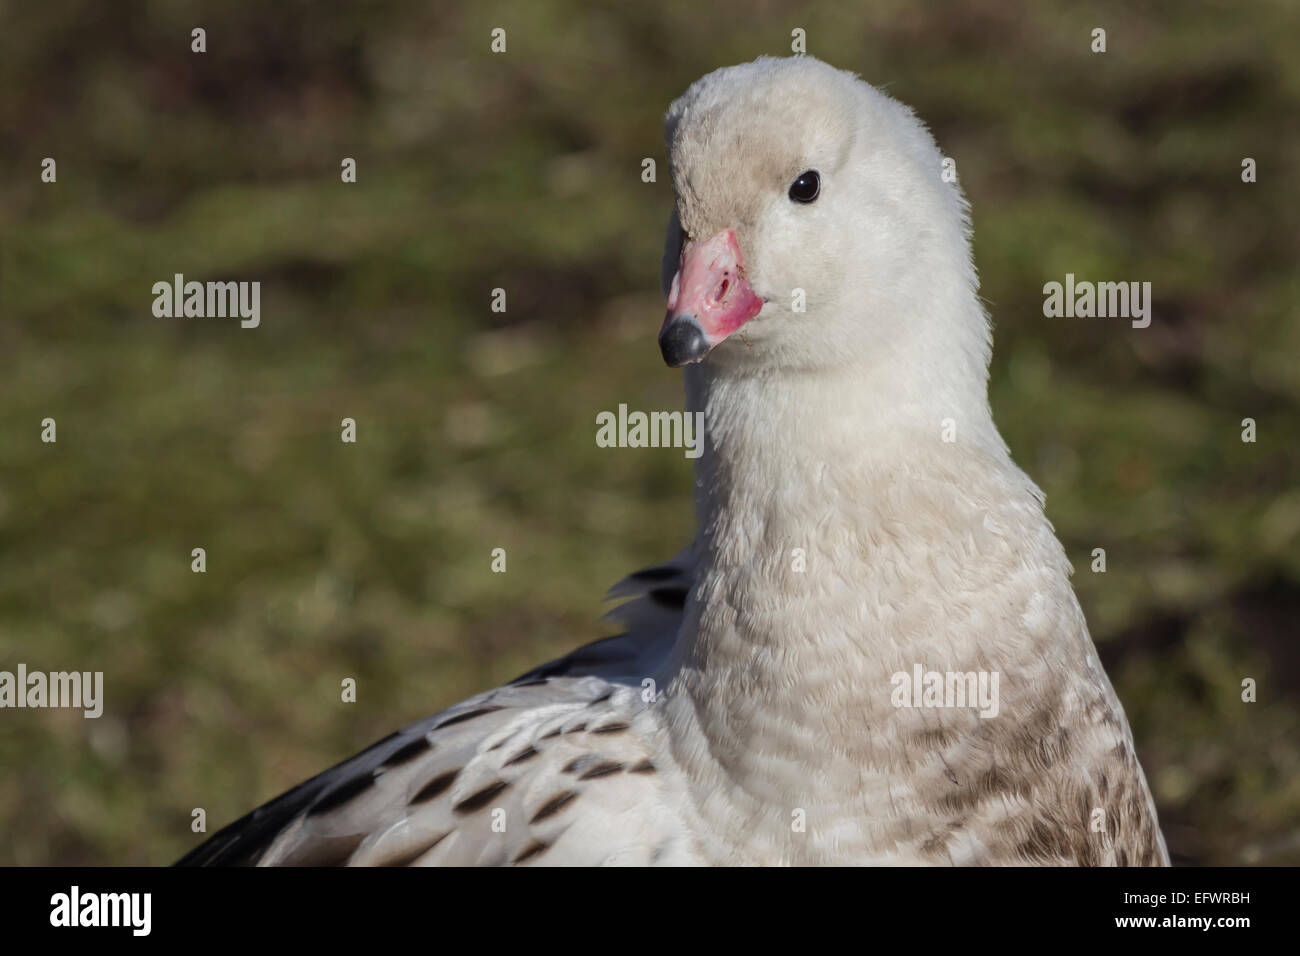 Close portrait of an Andean goose, Chloephaga melanoptera, showing neck and head against a natural background Stock Photo